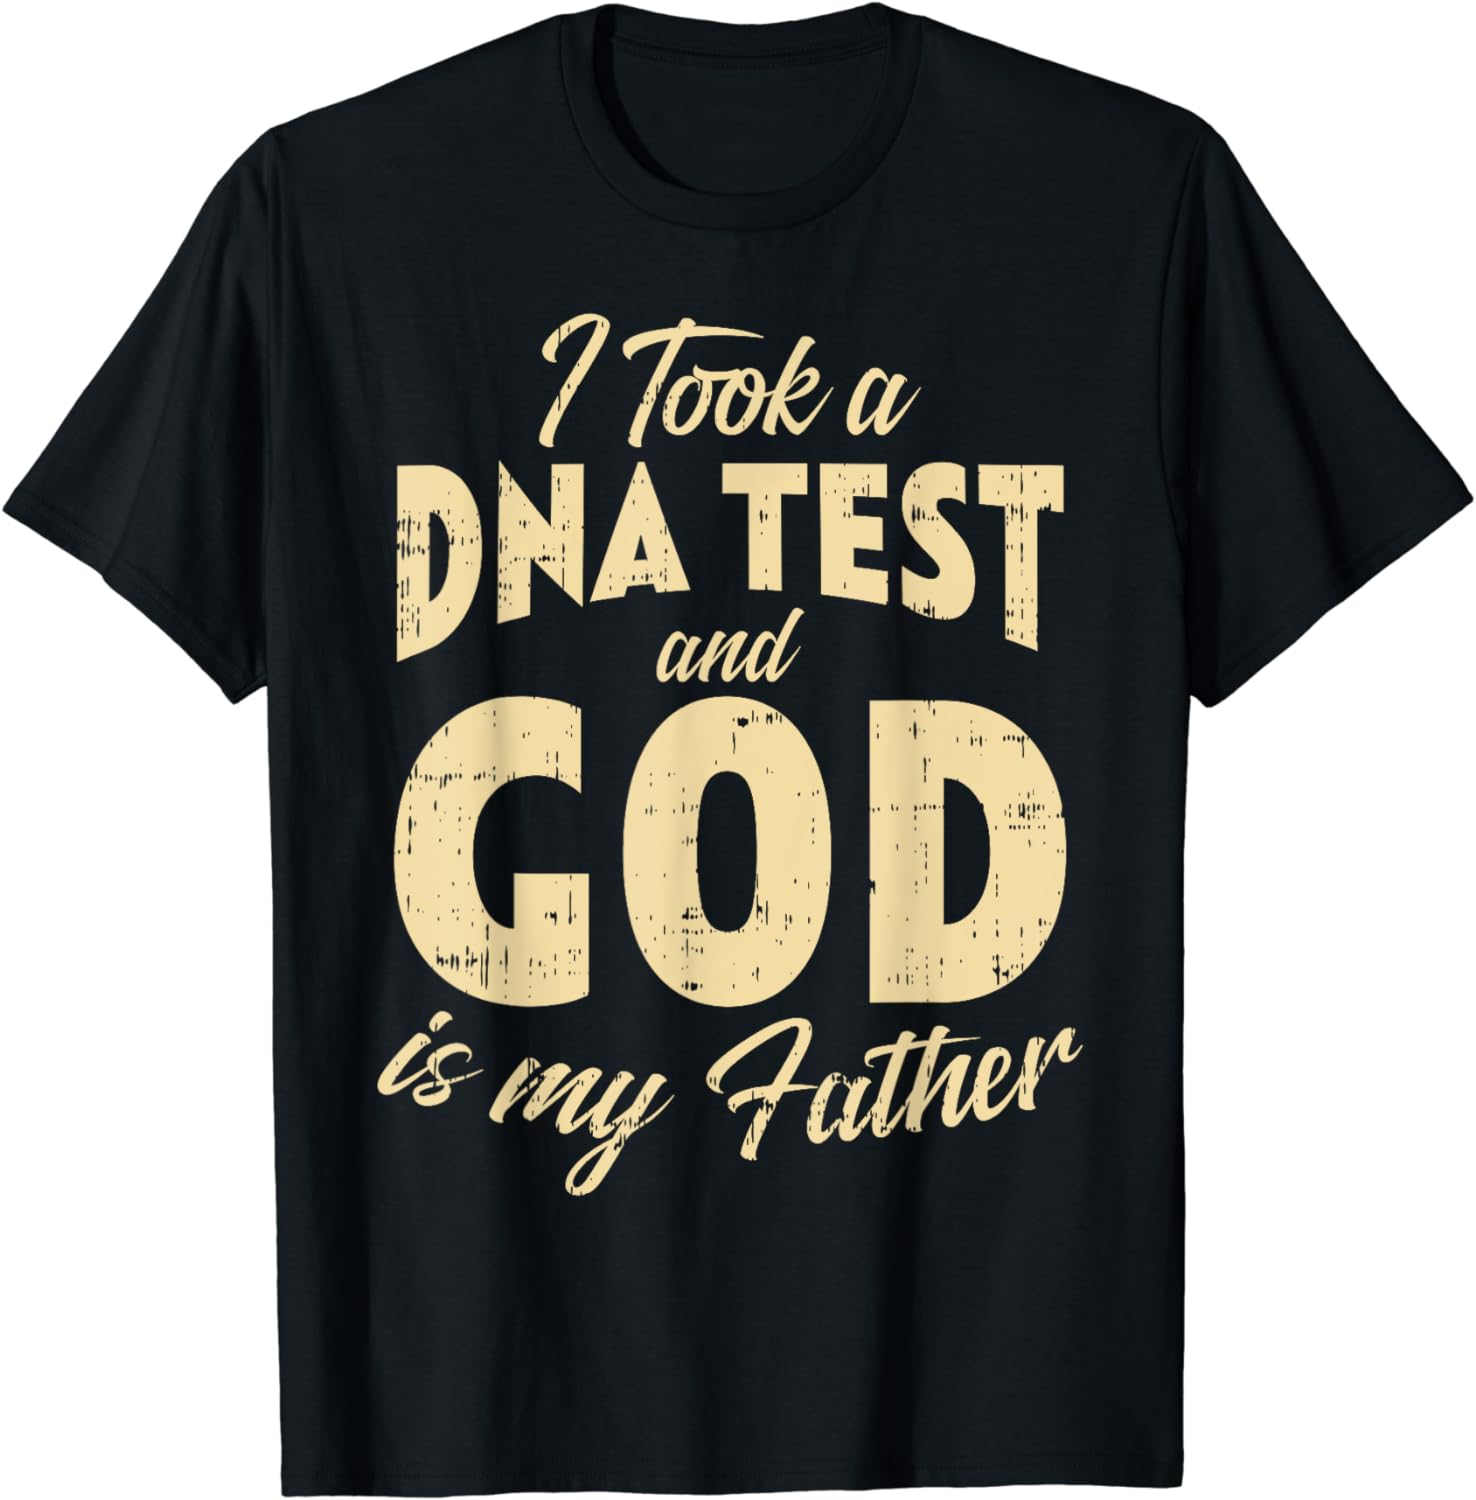 DNA Test God My Father Jesus Christ Religious Christian Gift T-Shirt ...